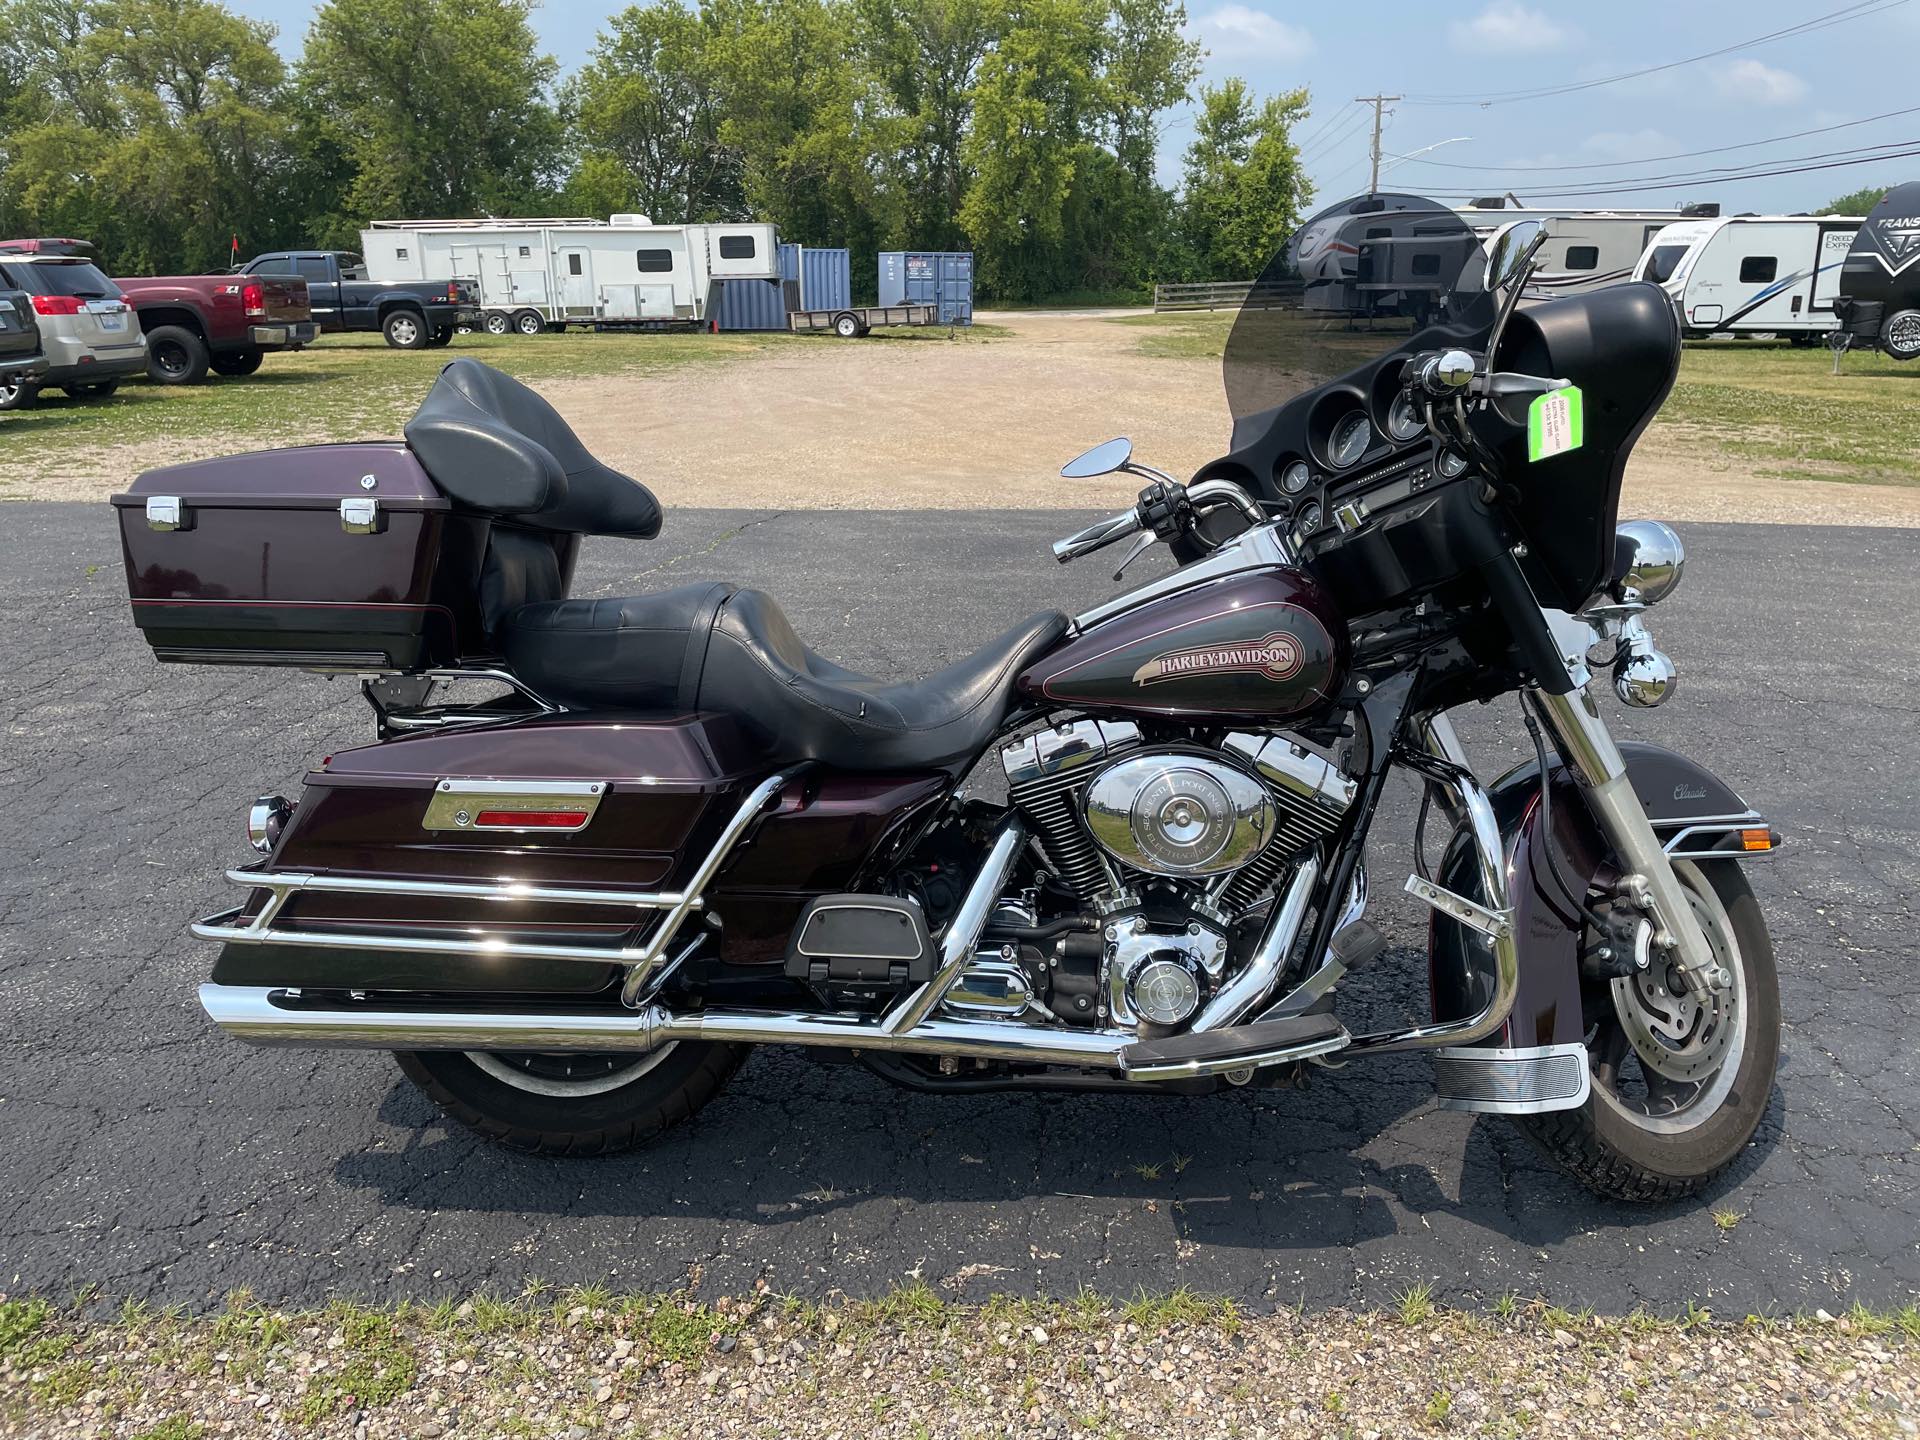 2006 Harley-Davidson Electra Glide Classic at Randy's Cycle